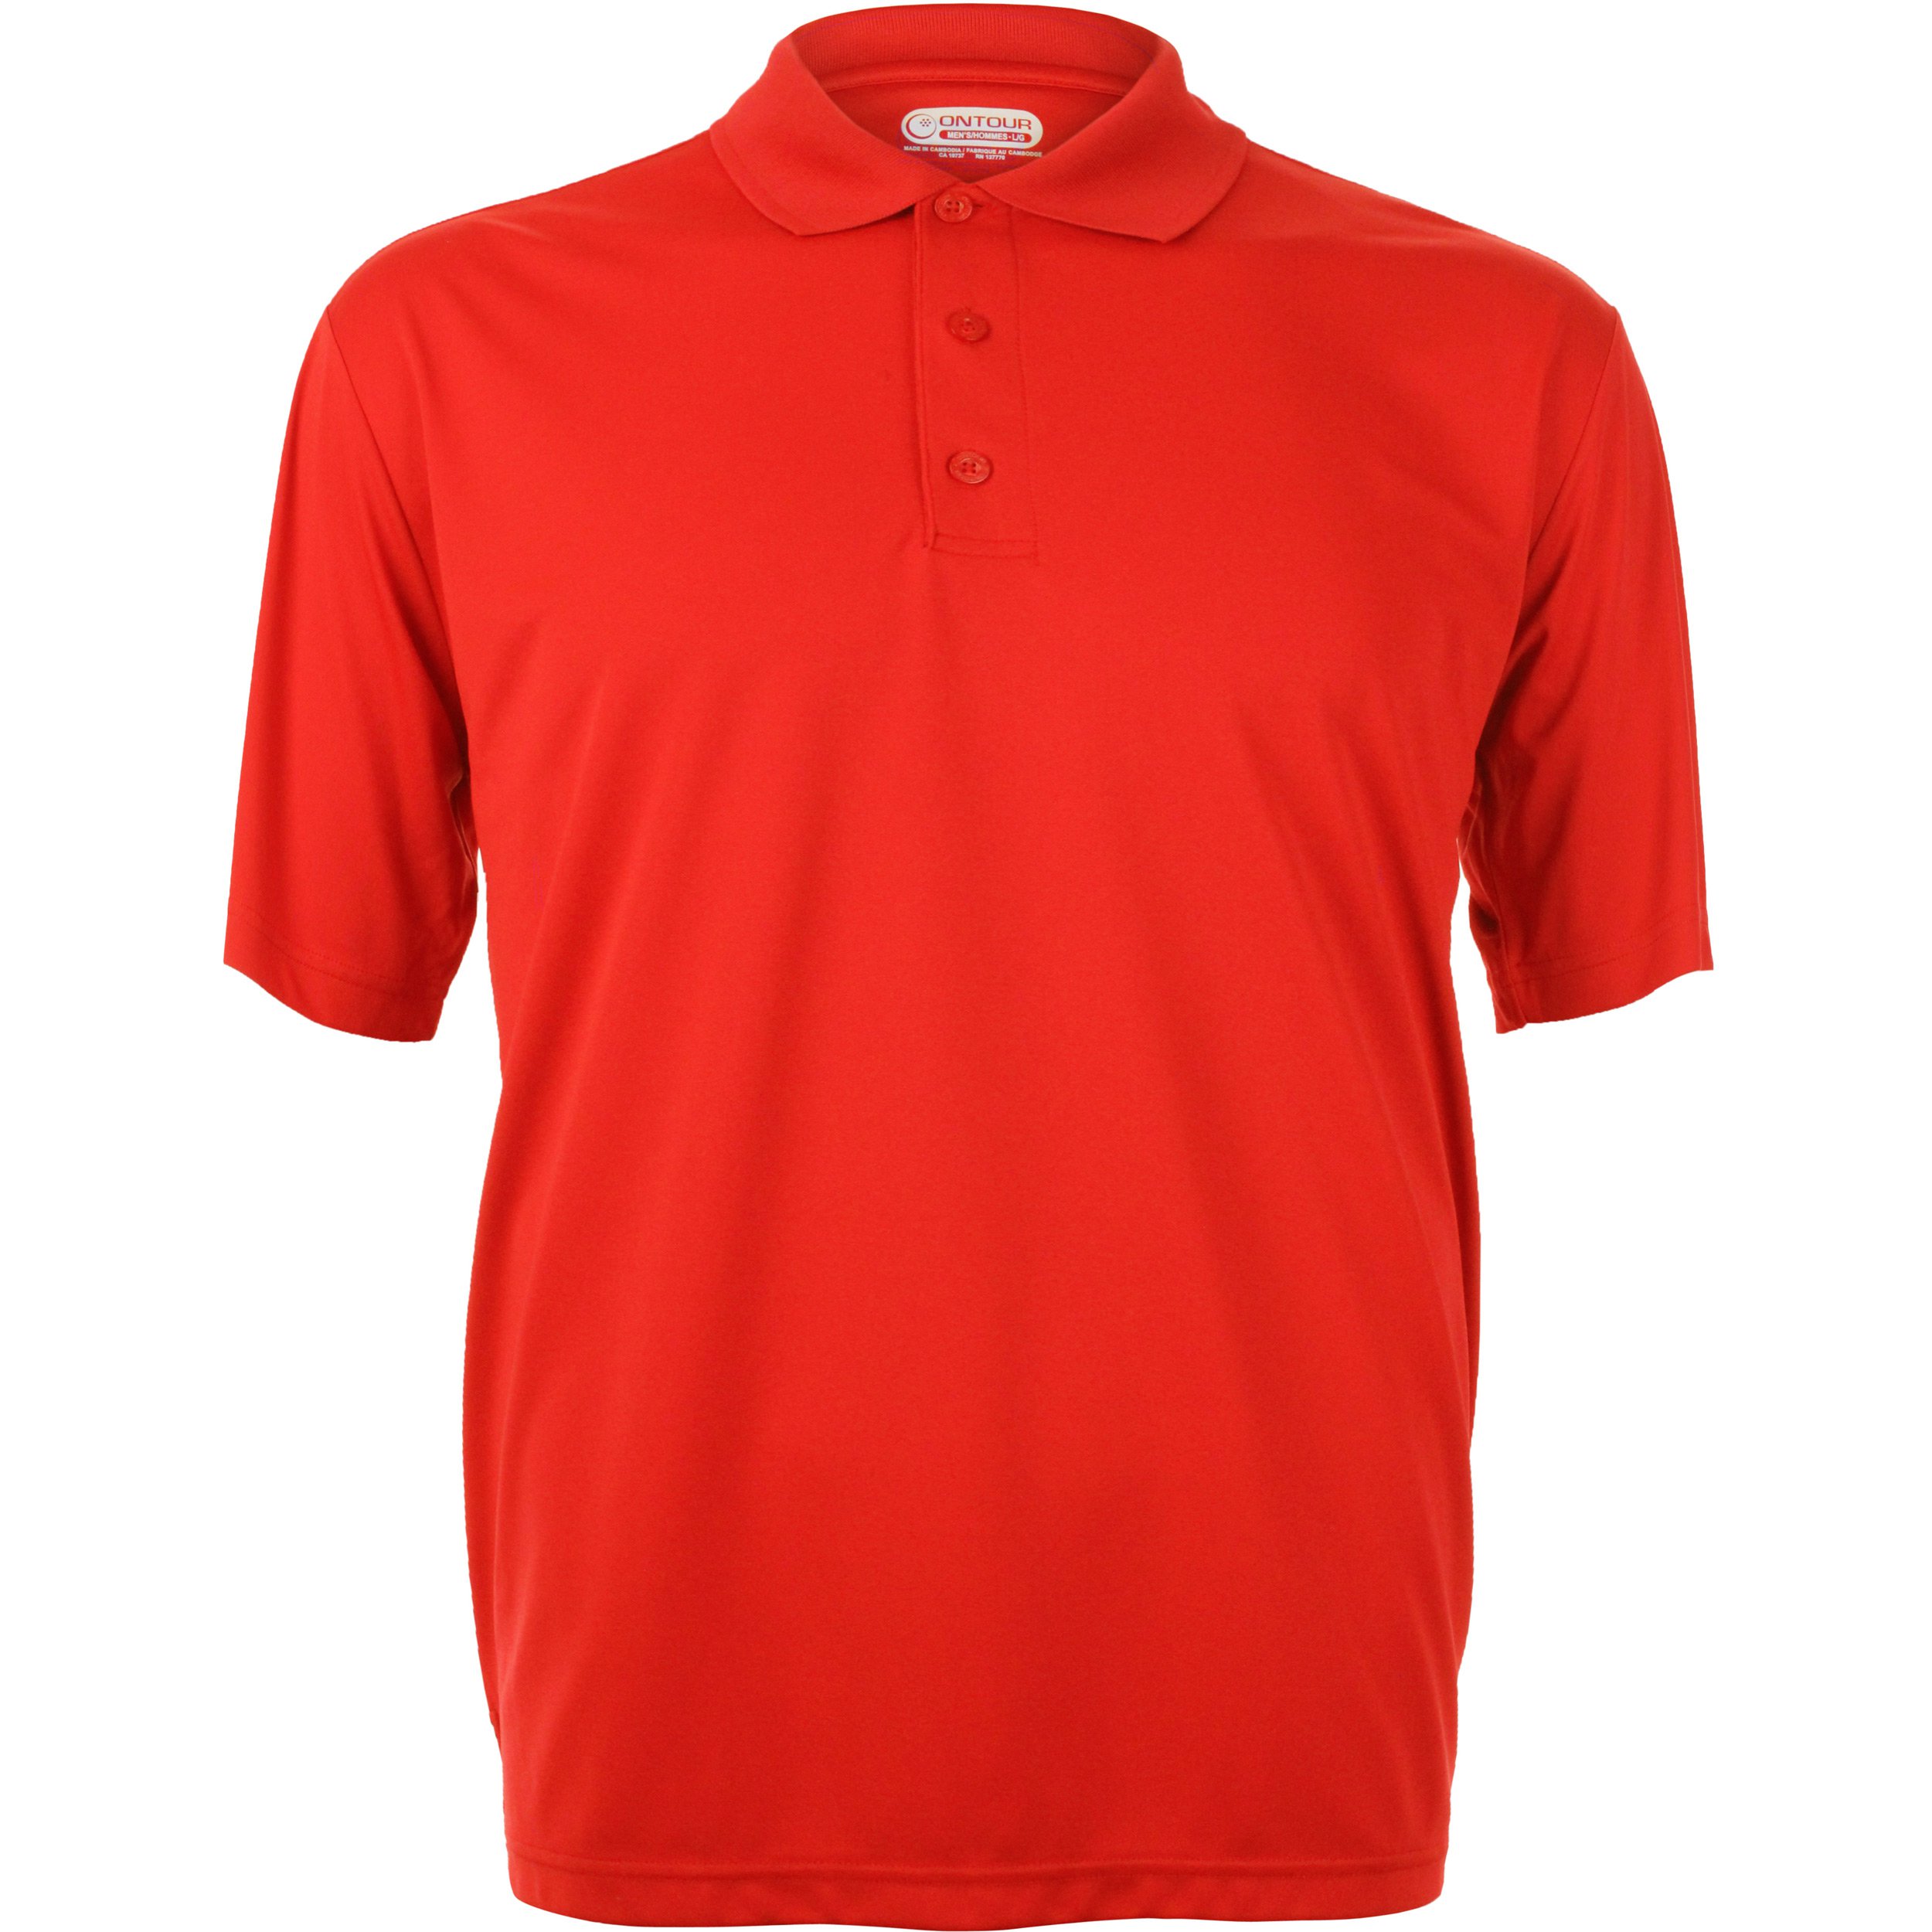 Moreno Short Sleeve Polo Shirt by TRIMARK (Men's) | Embroidered ...